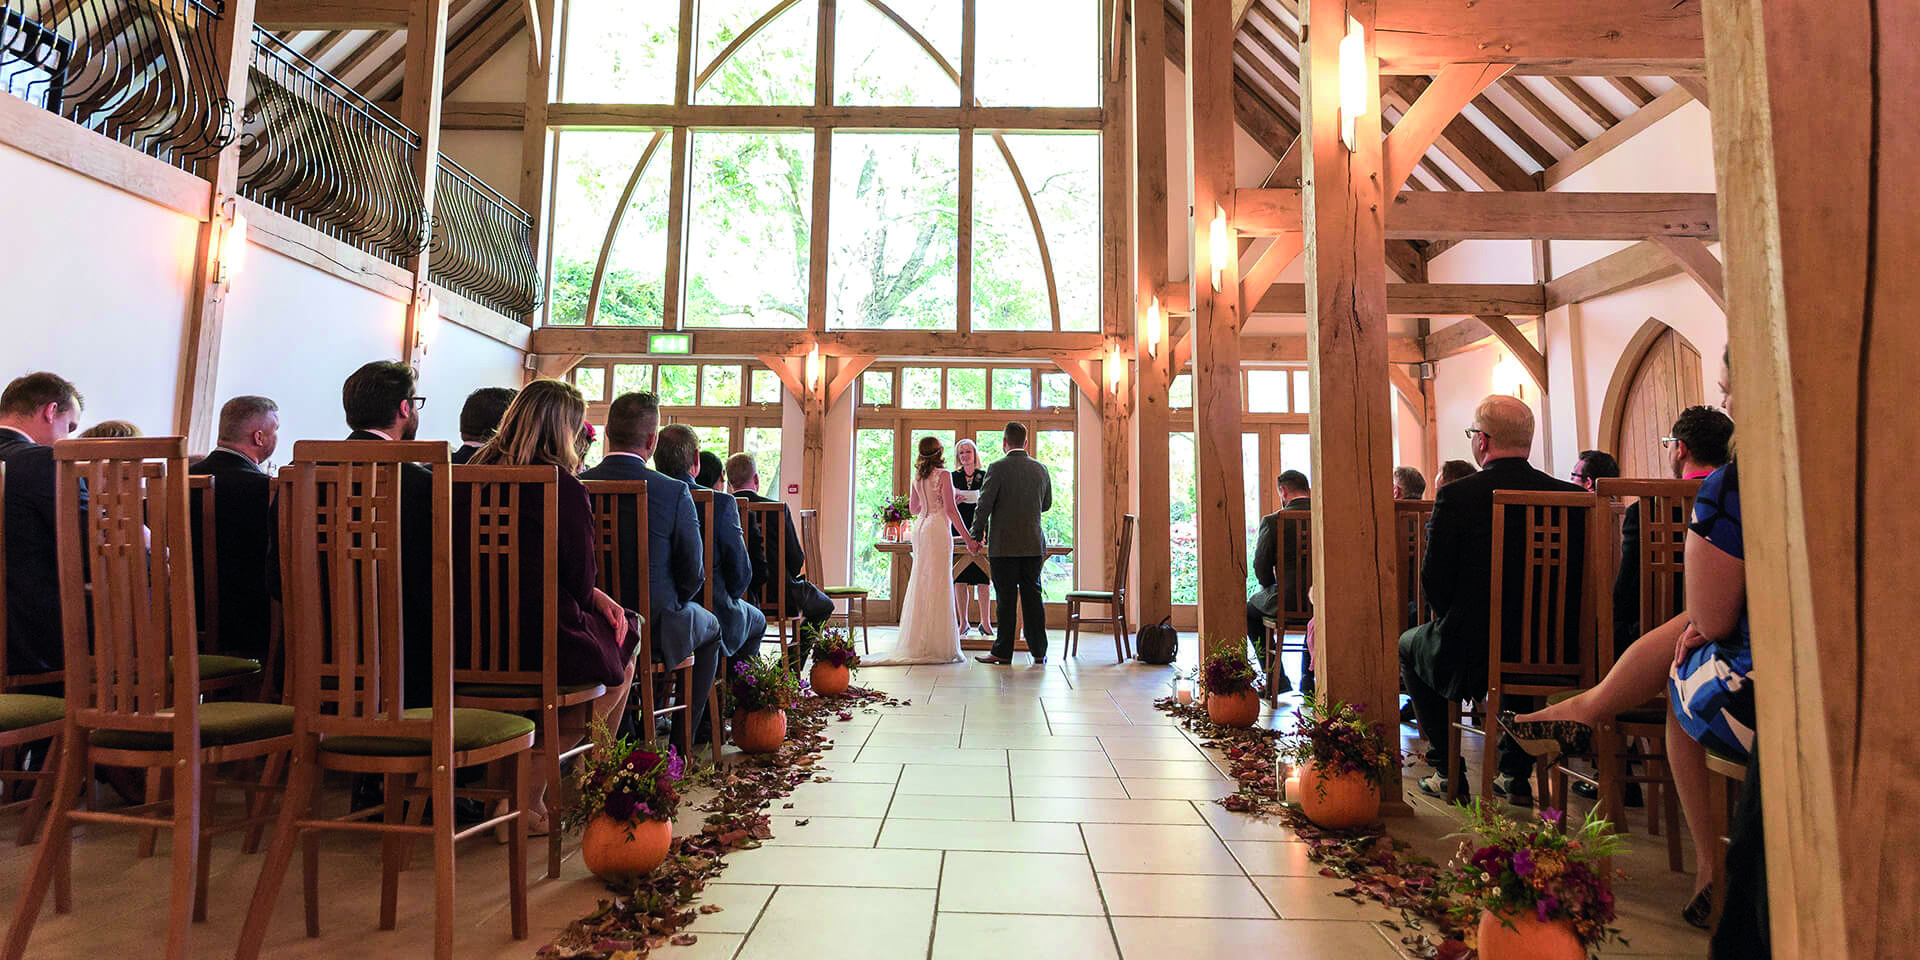 This autumn themed wedding ceremony was set up with seasonal colours